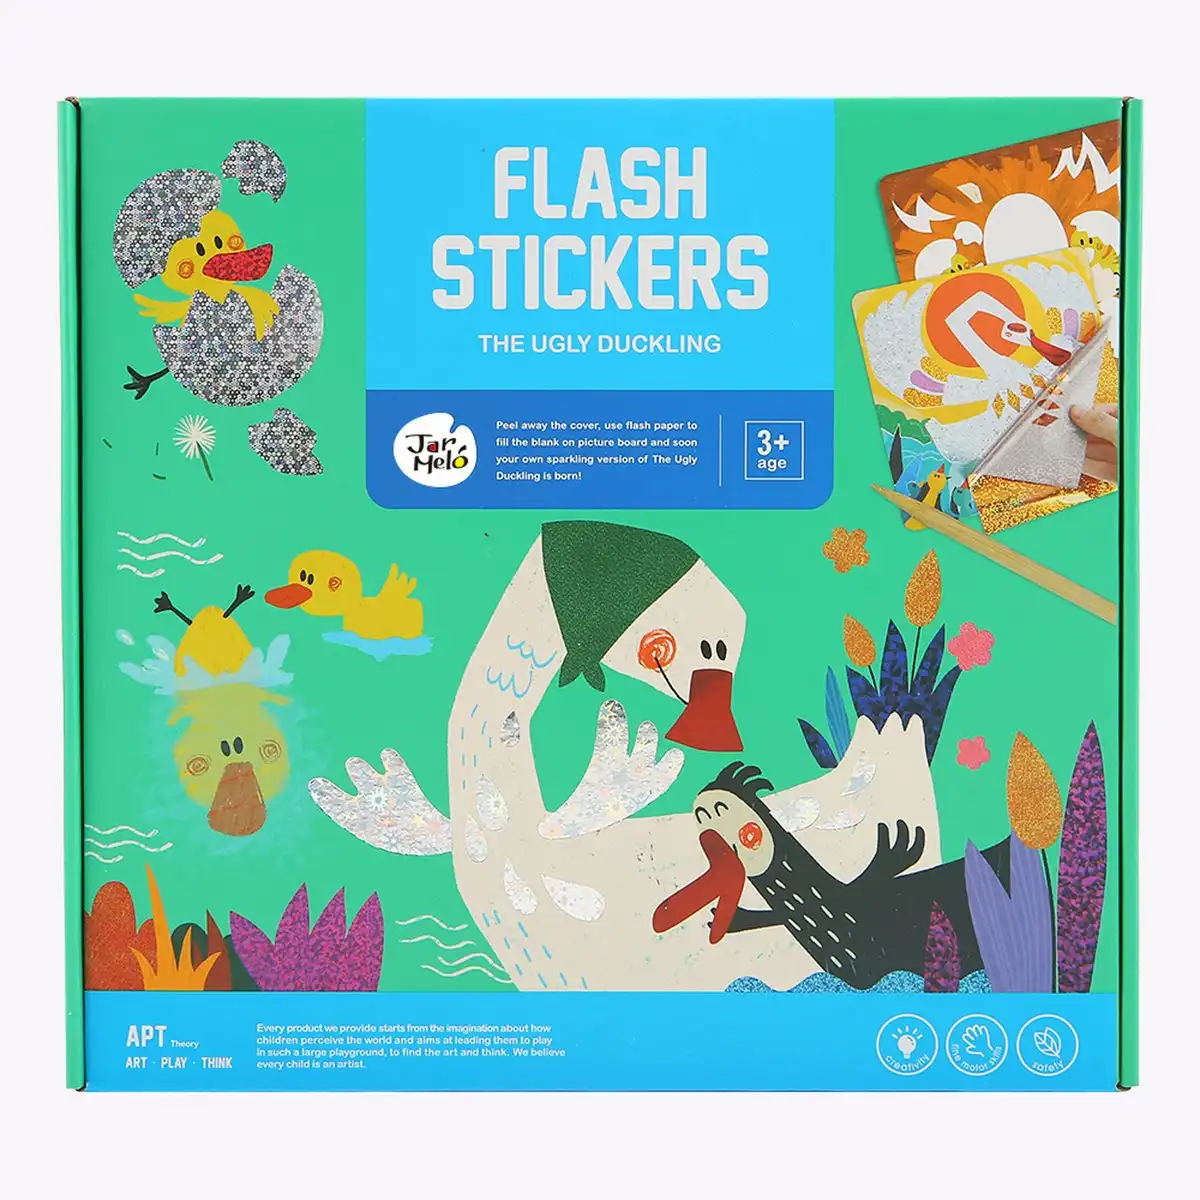 48pc Jarmelo The Ugly Duckling Flash Stickers Art/Craft Kit Kids Fun Play Toy 3+